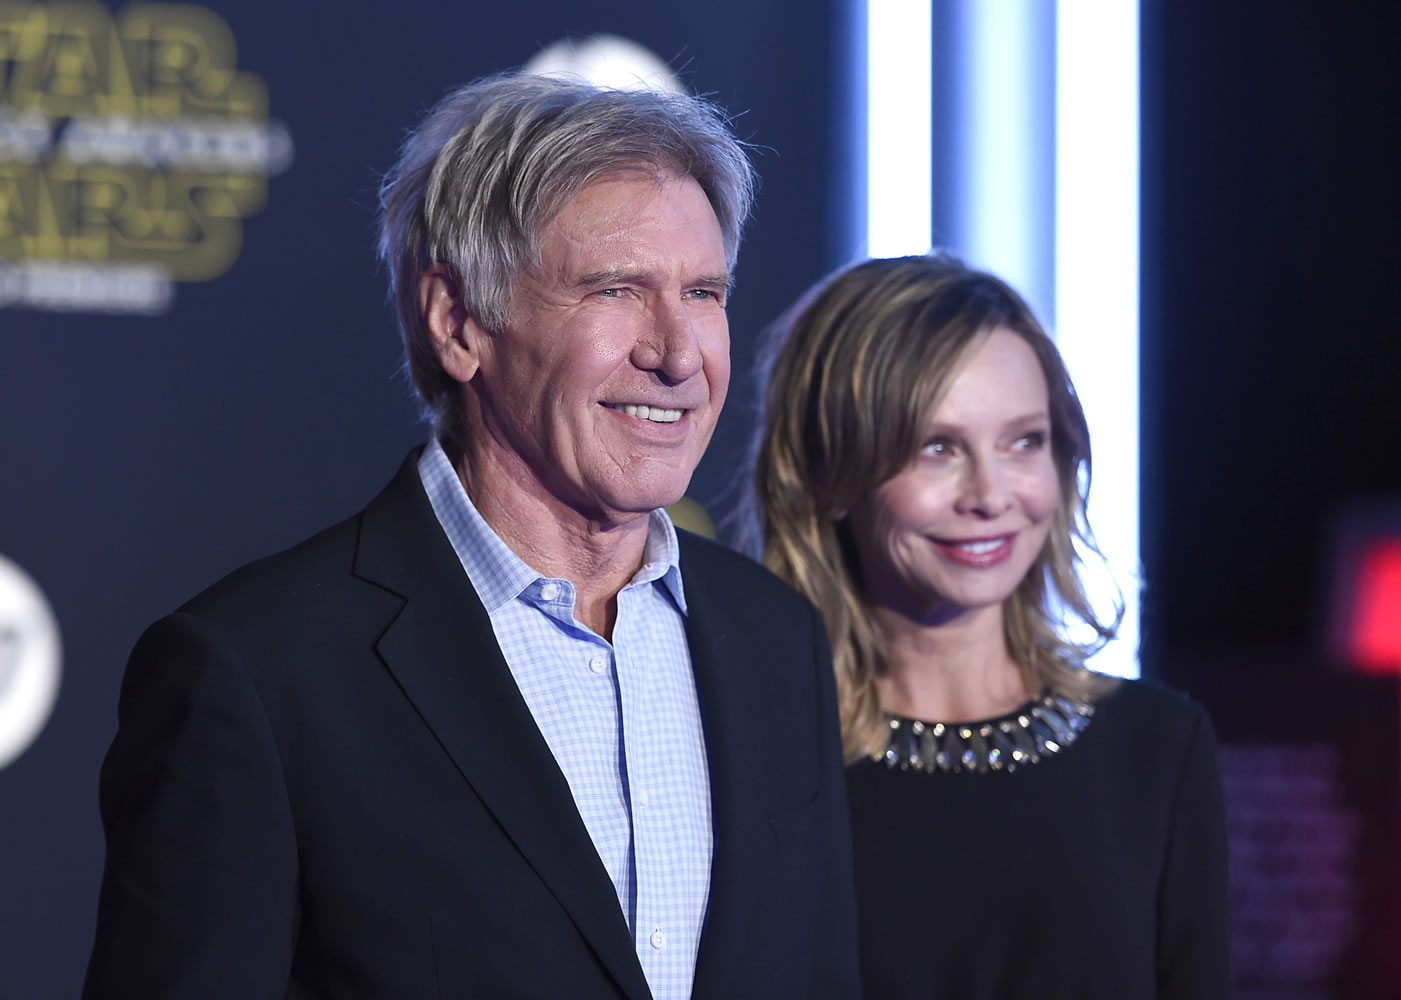 Harrison Ford, left, and Calista Flockhart arrive at the world premiere of "Star Wars: The Force Awakens" at the TCL Chinese Theatre on Monday, Dec. 14, 2015, in Los Angeles. Ford plays the role of Han Solo in the film.